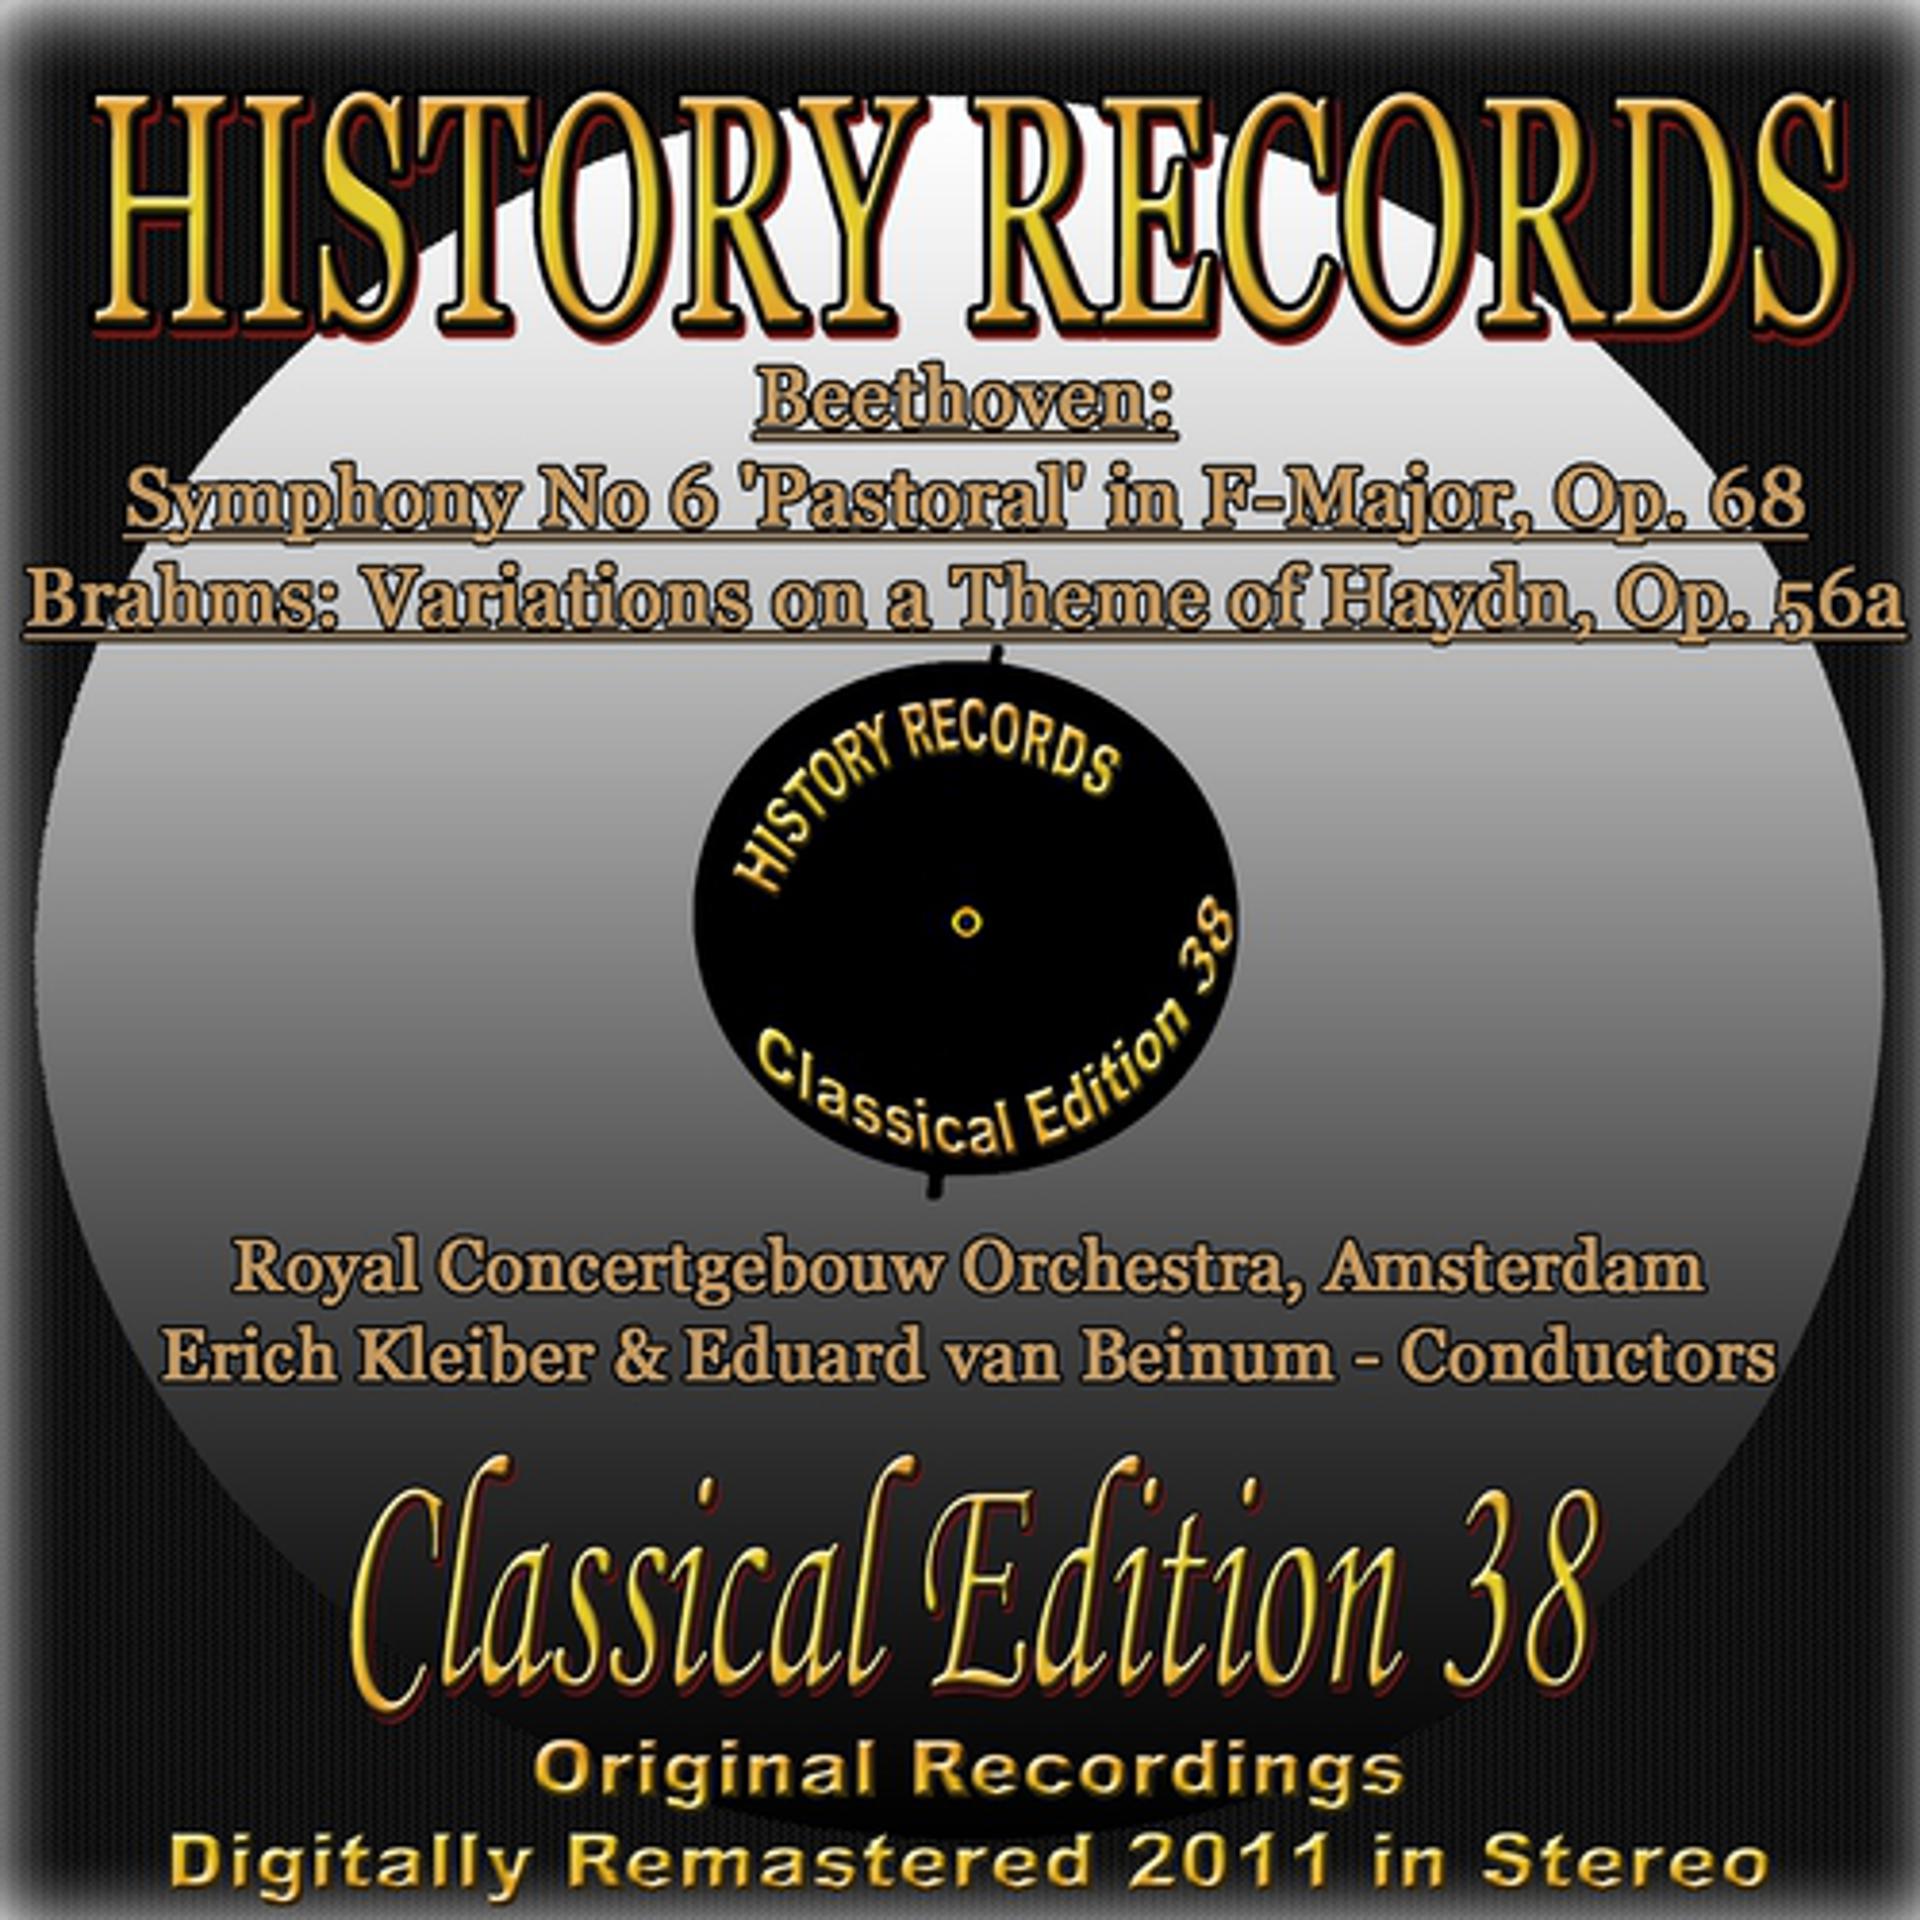 Постер альбома Beethoven: Symphony No 6 'Pastoral' in F-Major, Op. 68 & Brahms: Variations on a Theme of Haydn, Op. 56a (History Records - Classical Edition 38 - Original Recordings Digitally Remastered 2011 In Stereo)